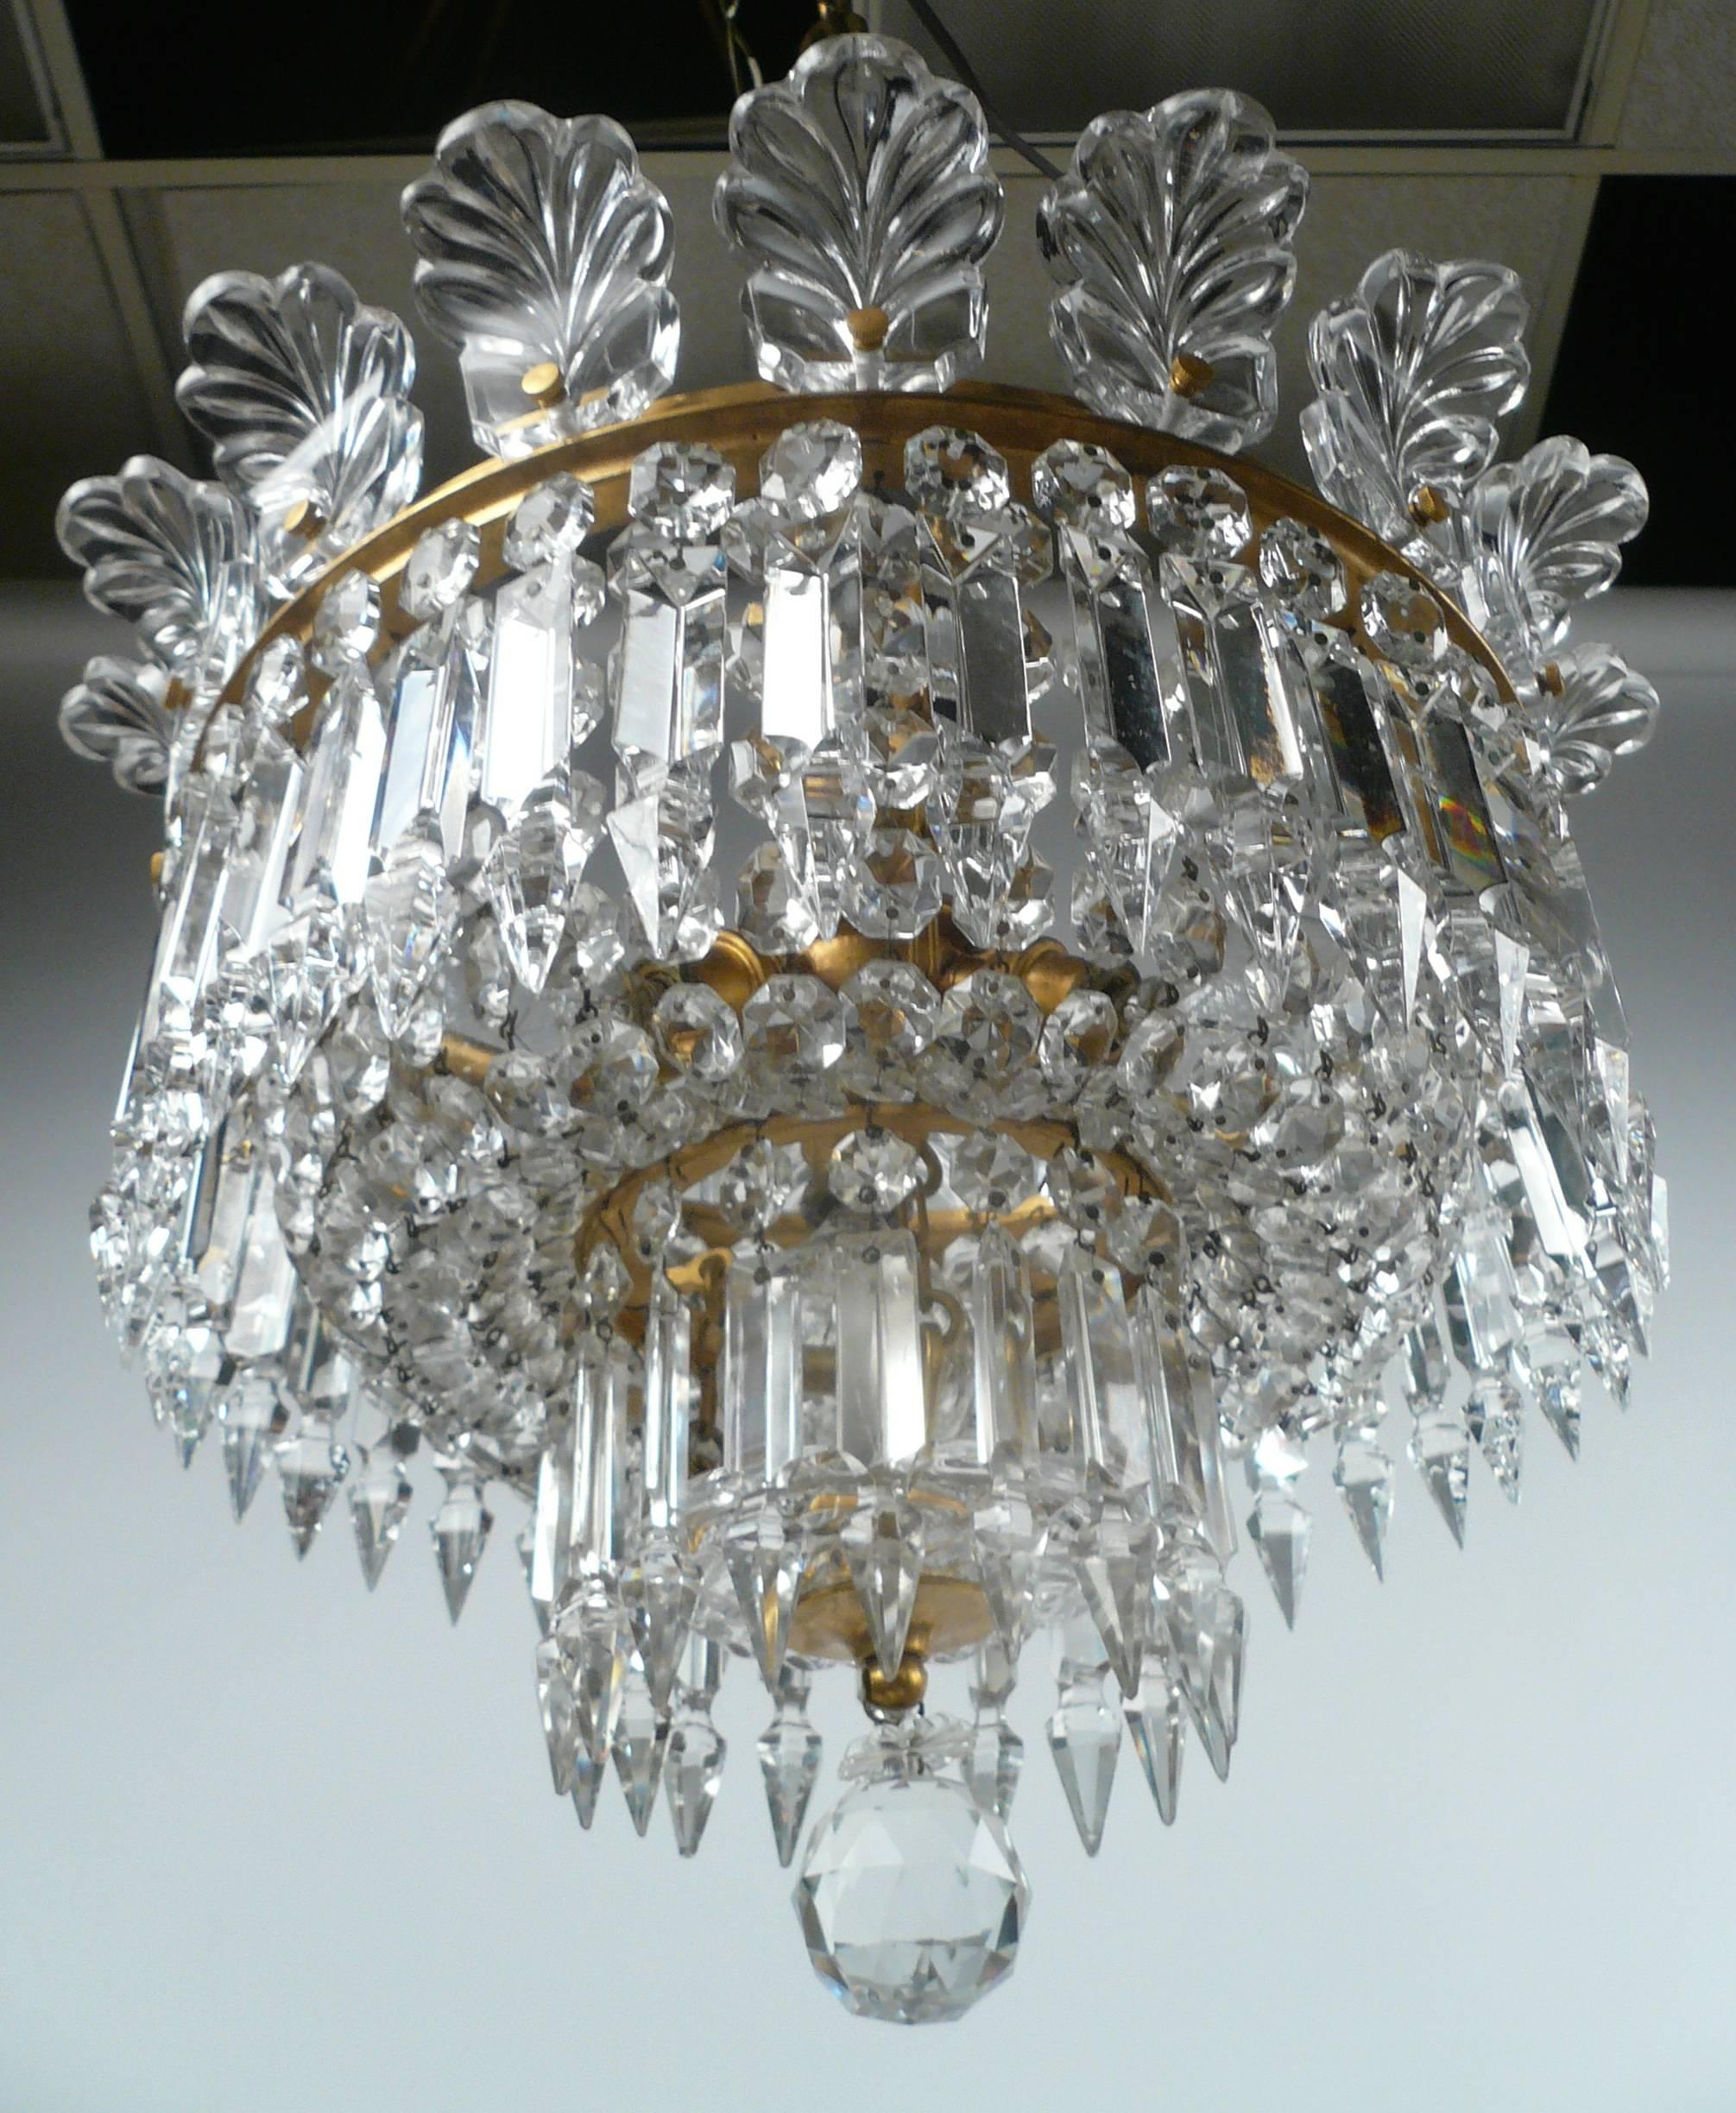 Faceted Signed Baccarat 'Crinoline' Gilt Bronze and Cut Crystal Chandelier